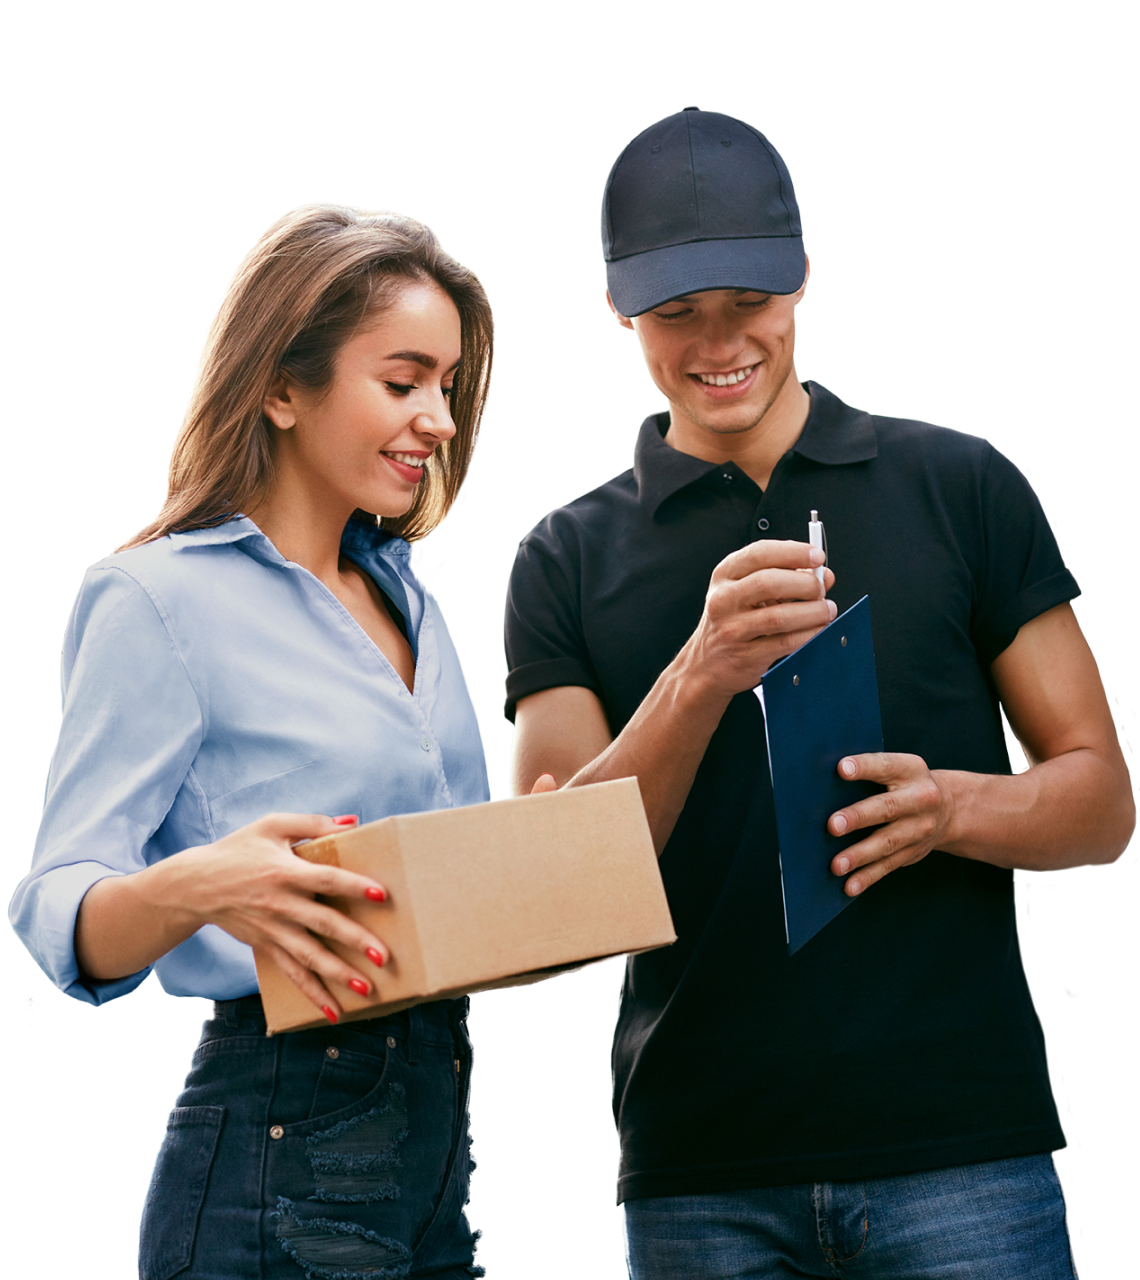 Cash in Delivery in Mumbai - experienced courier - borzo delivery